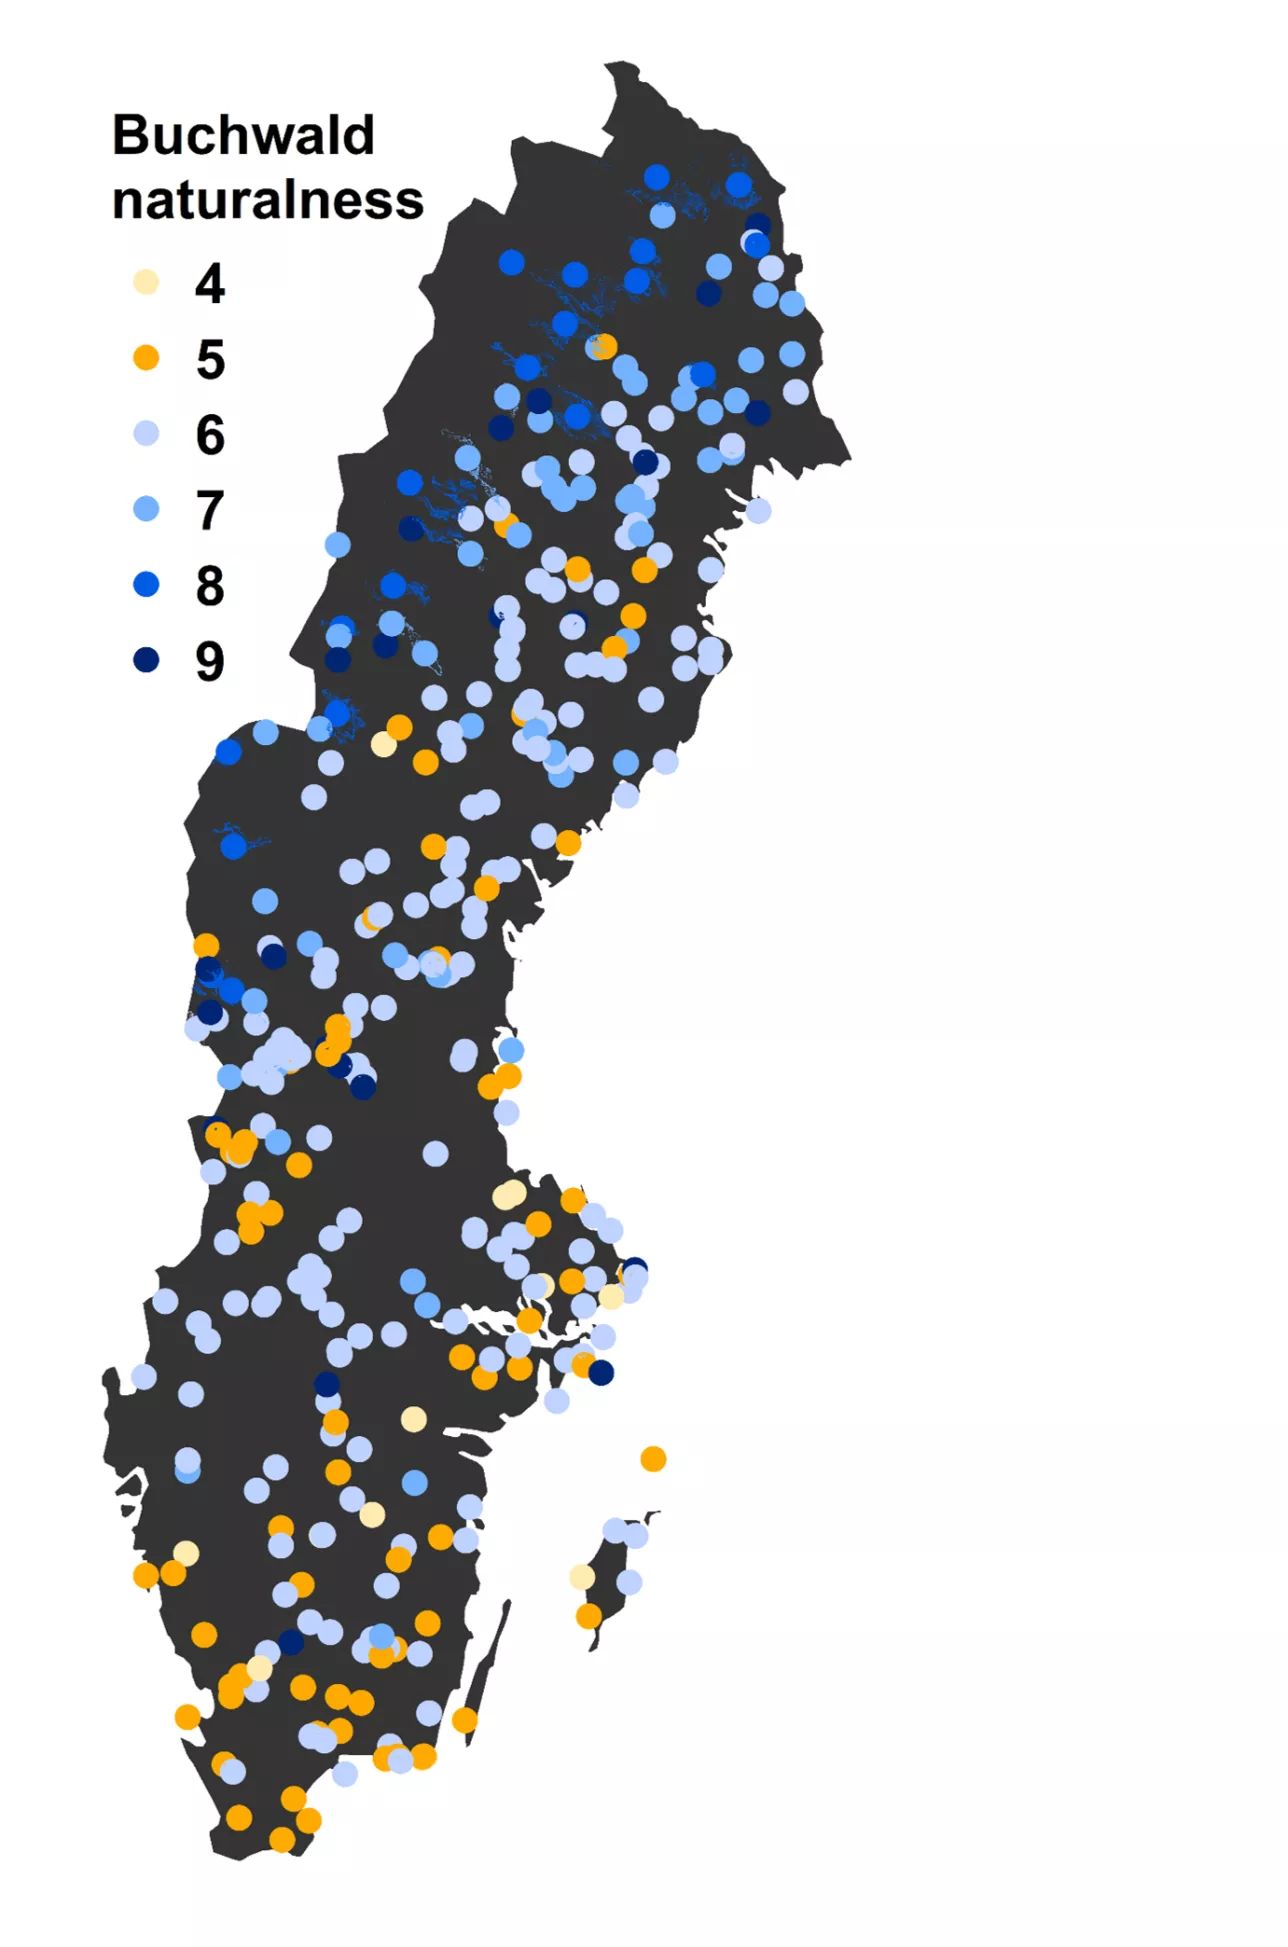 Dark blue graphic map of Sweden showing inventory of forests as dots in various colours, repersenting the degree of naturalness.